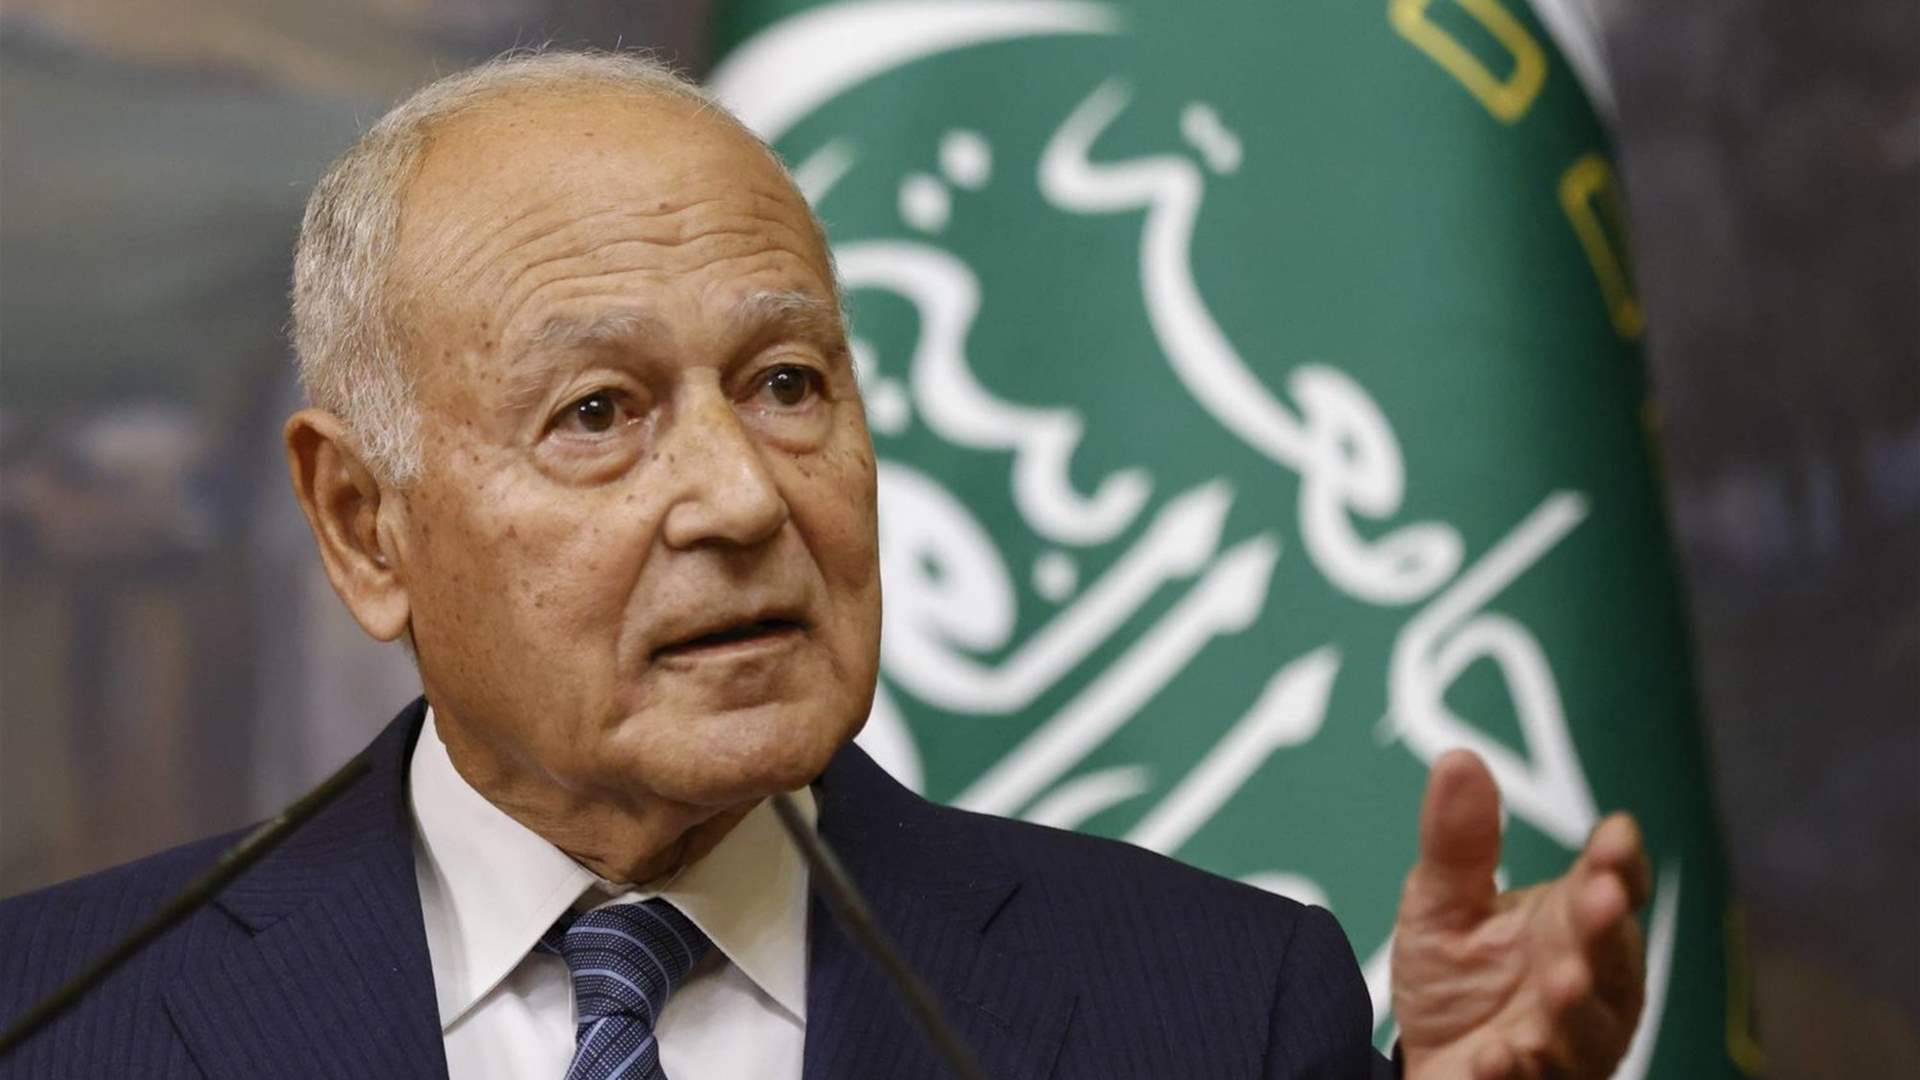 Aboul Gheit urges international pressure on Israel to prevent regional conflict